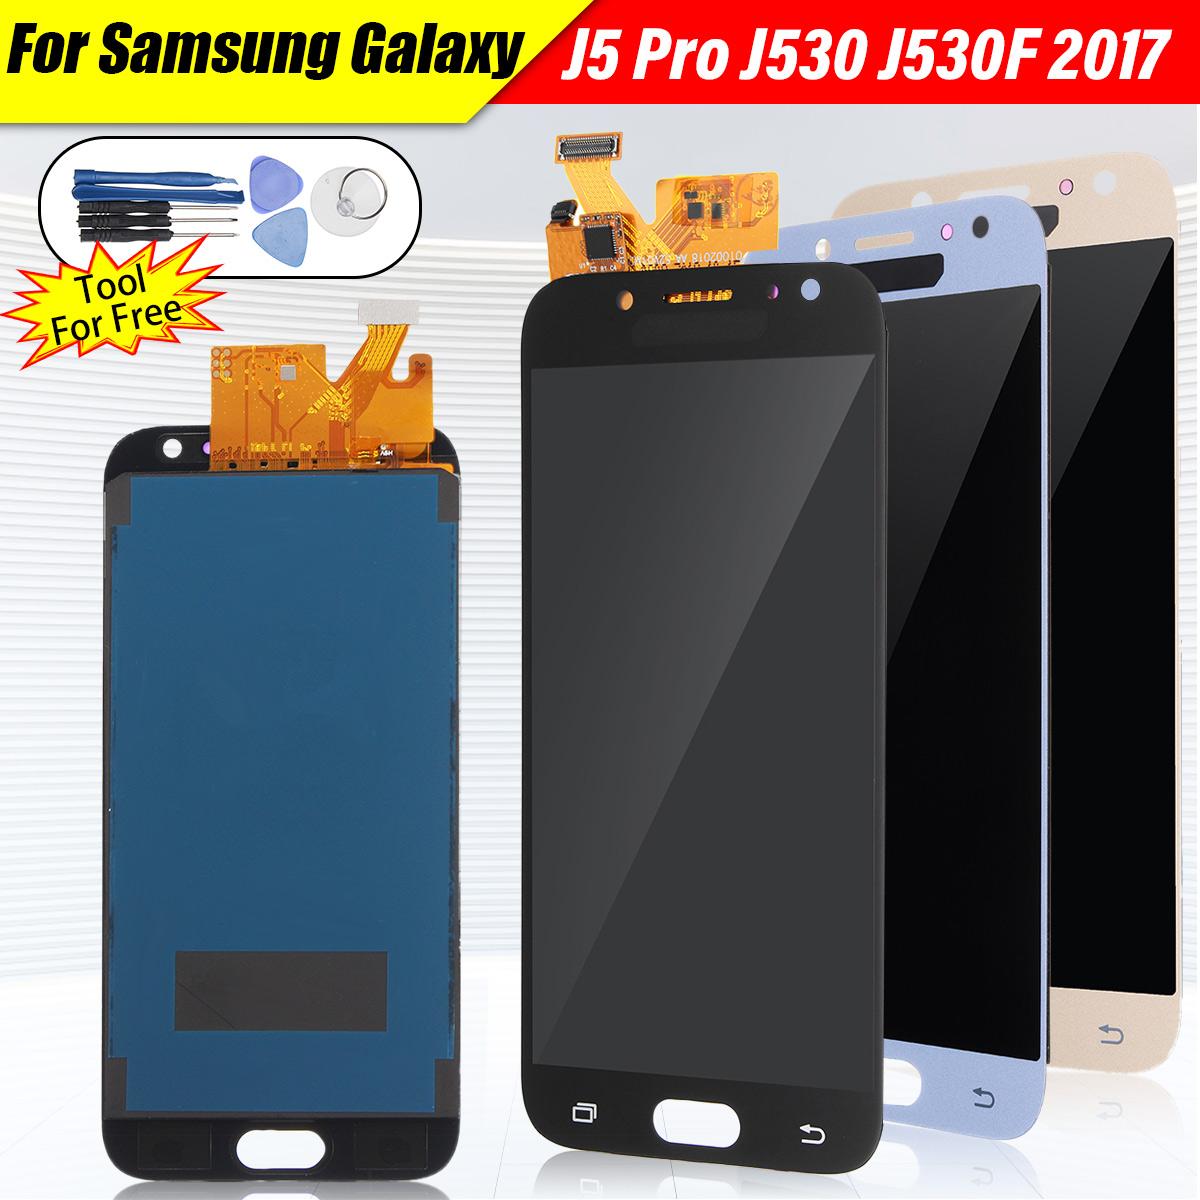 Lcd Display Touch Screen Digitizer For Samsung Mobiles Galaxy J5 Pro 17 J530 J530f Y G Blue Buy Online At Best Prices In Bangladesh Daraz Com